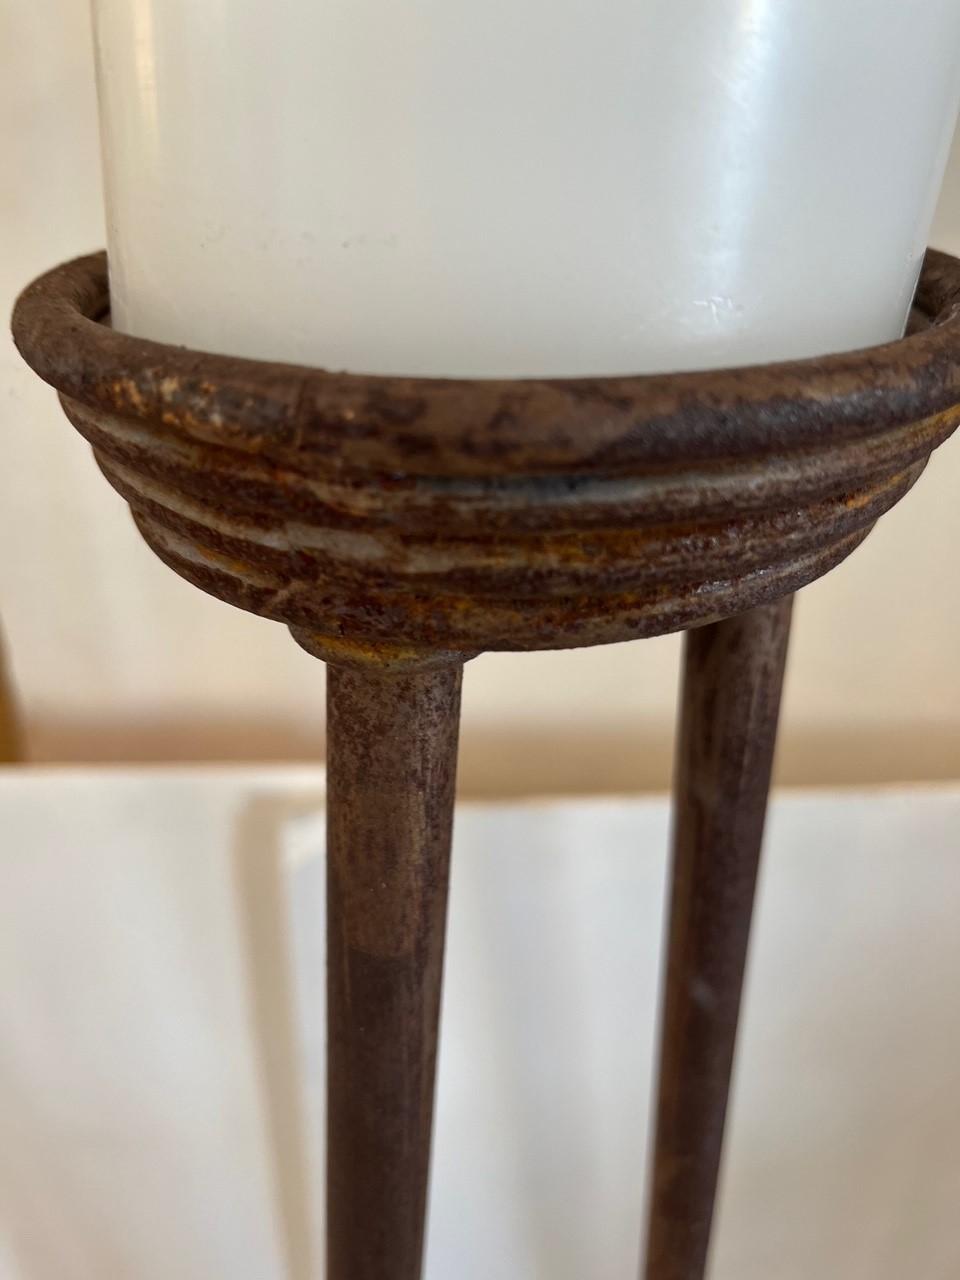 Pair of Vintage Forged Iron Floor Candleholder, Aged Iron with Rust Undertone, Good wear consistent with age and use
Tall Floor Candleholder: 60